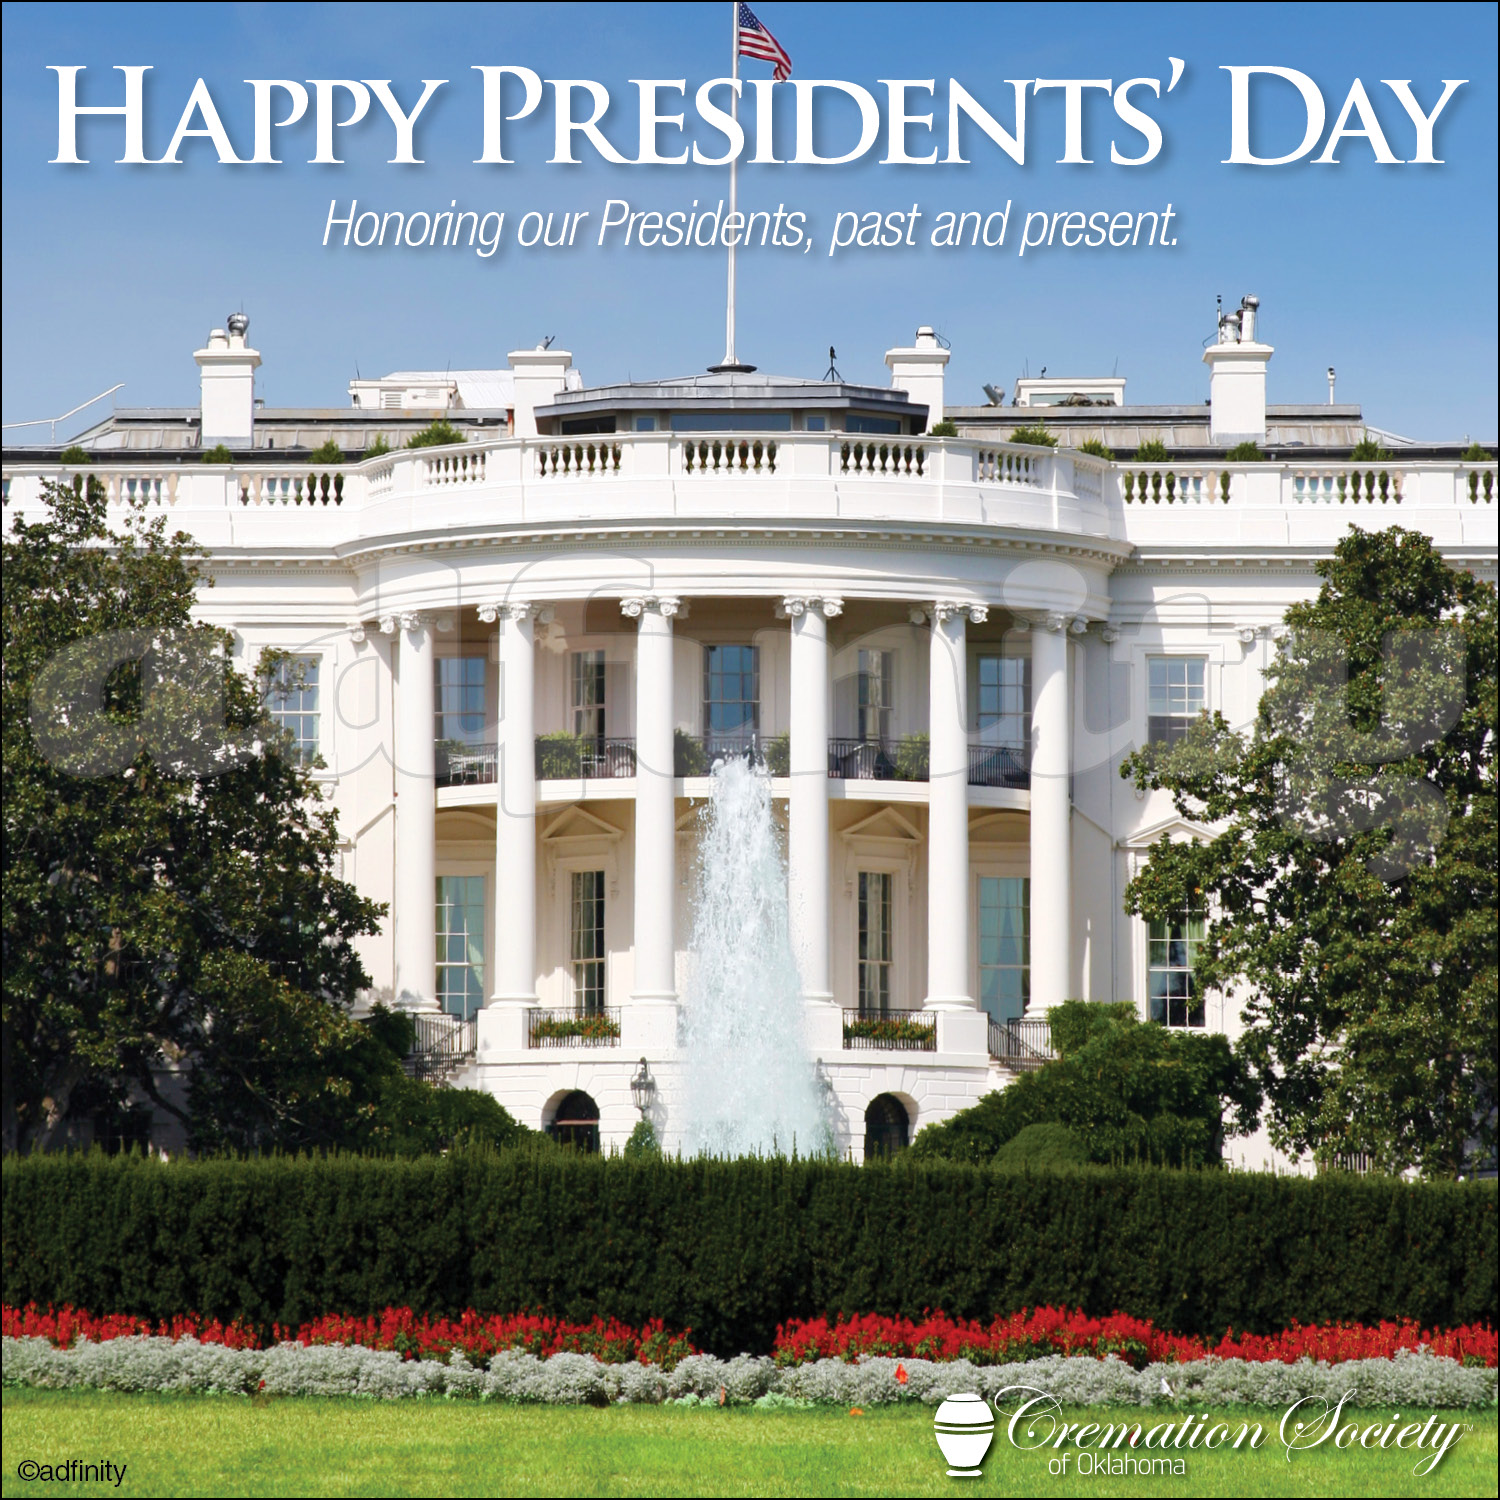 http://www.adfinity.net/catalog/happy-presidents-day-white-house-facebook/